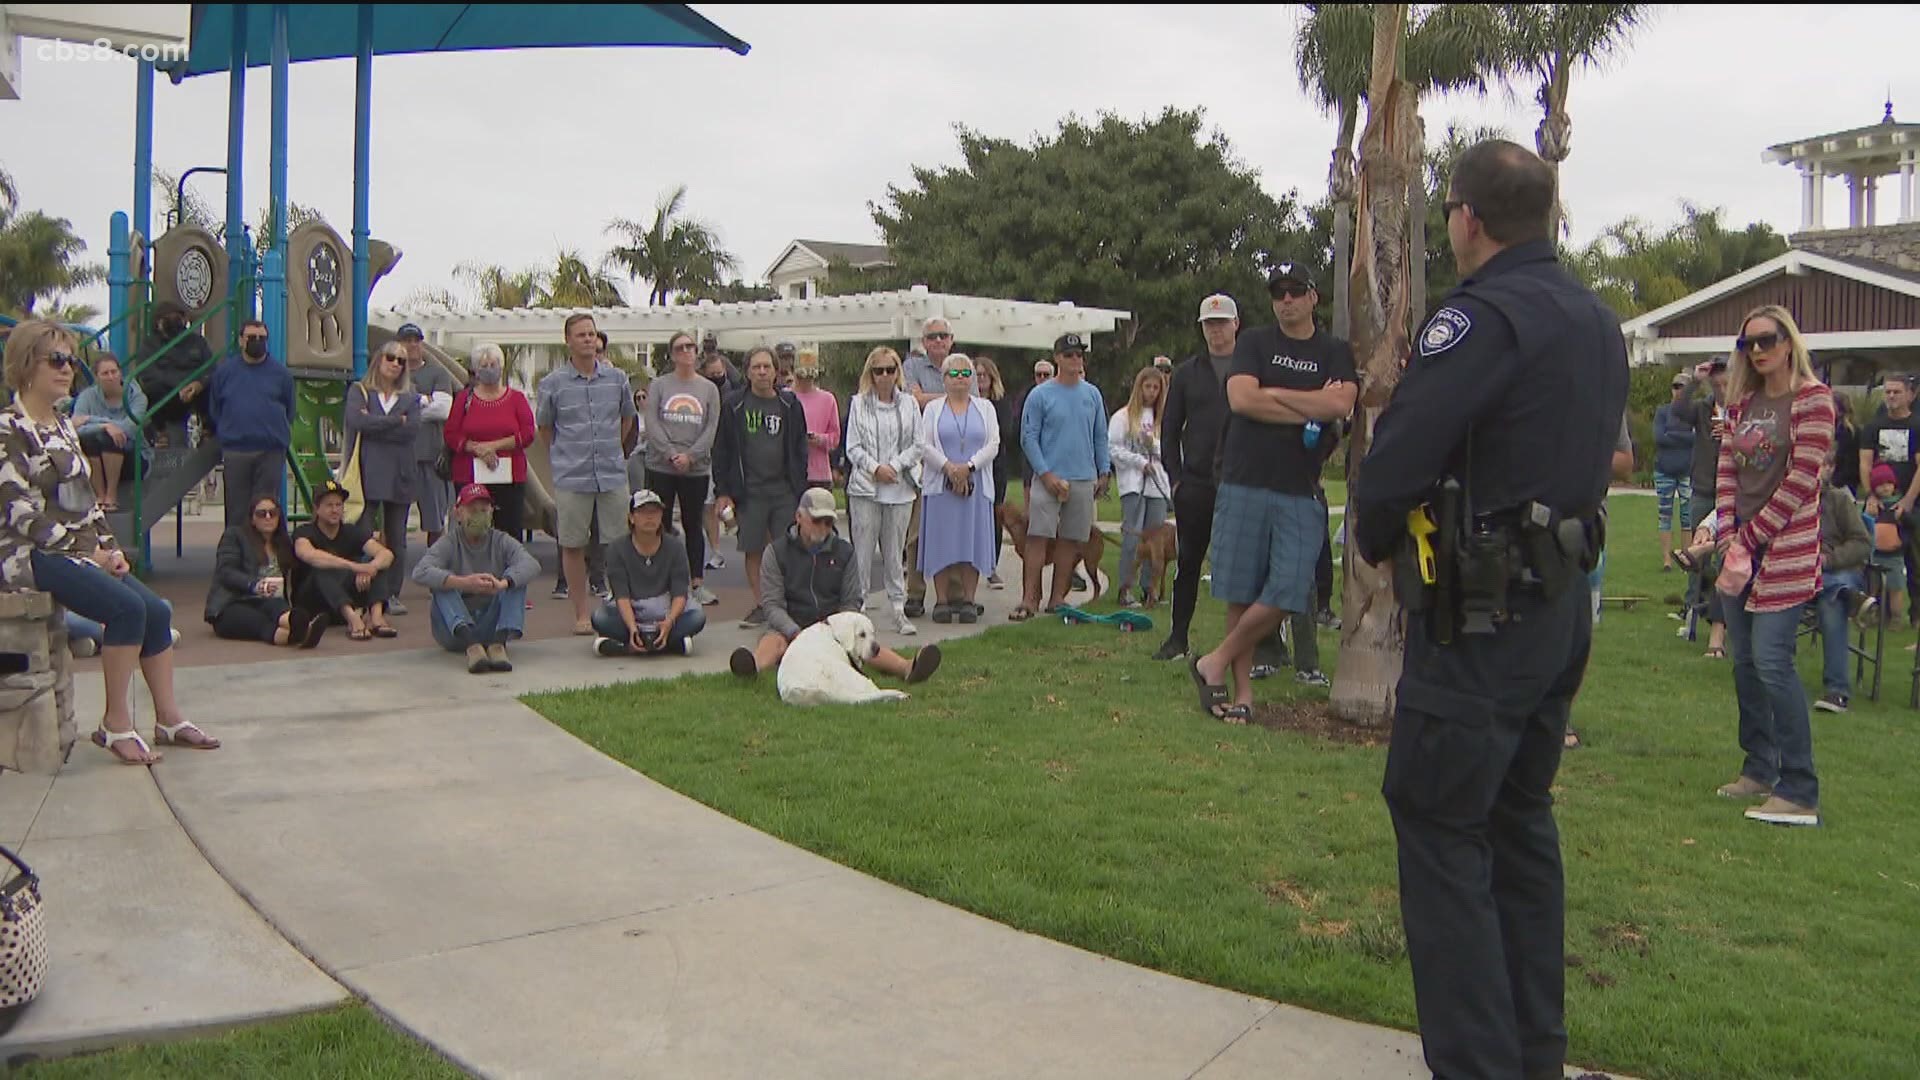 Concerned over an increase in crime and homelessness, residents in Carlsbad made their fears known to city leaders and police officers in an open neighborhood forum.